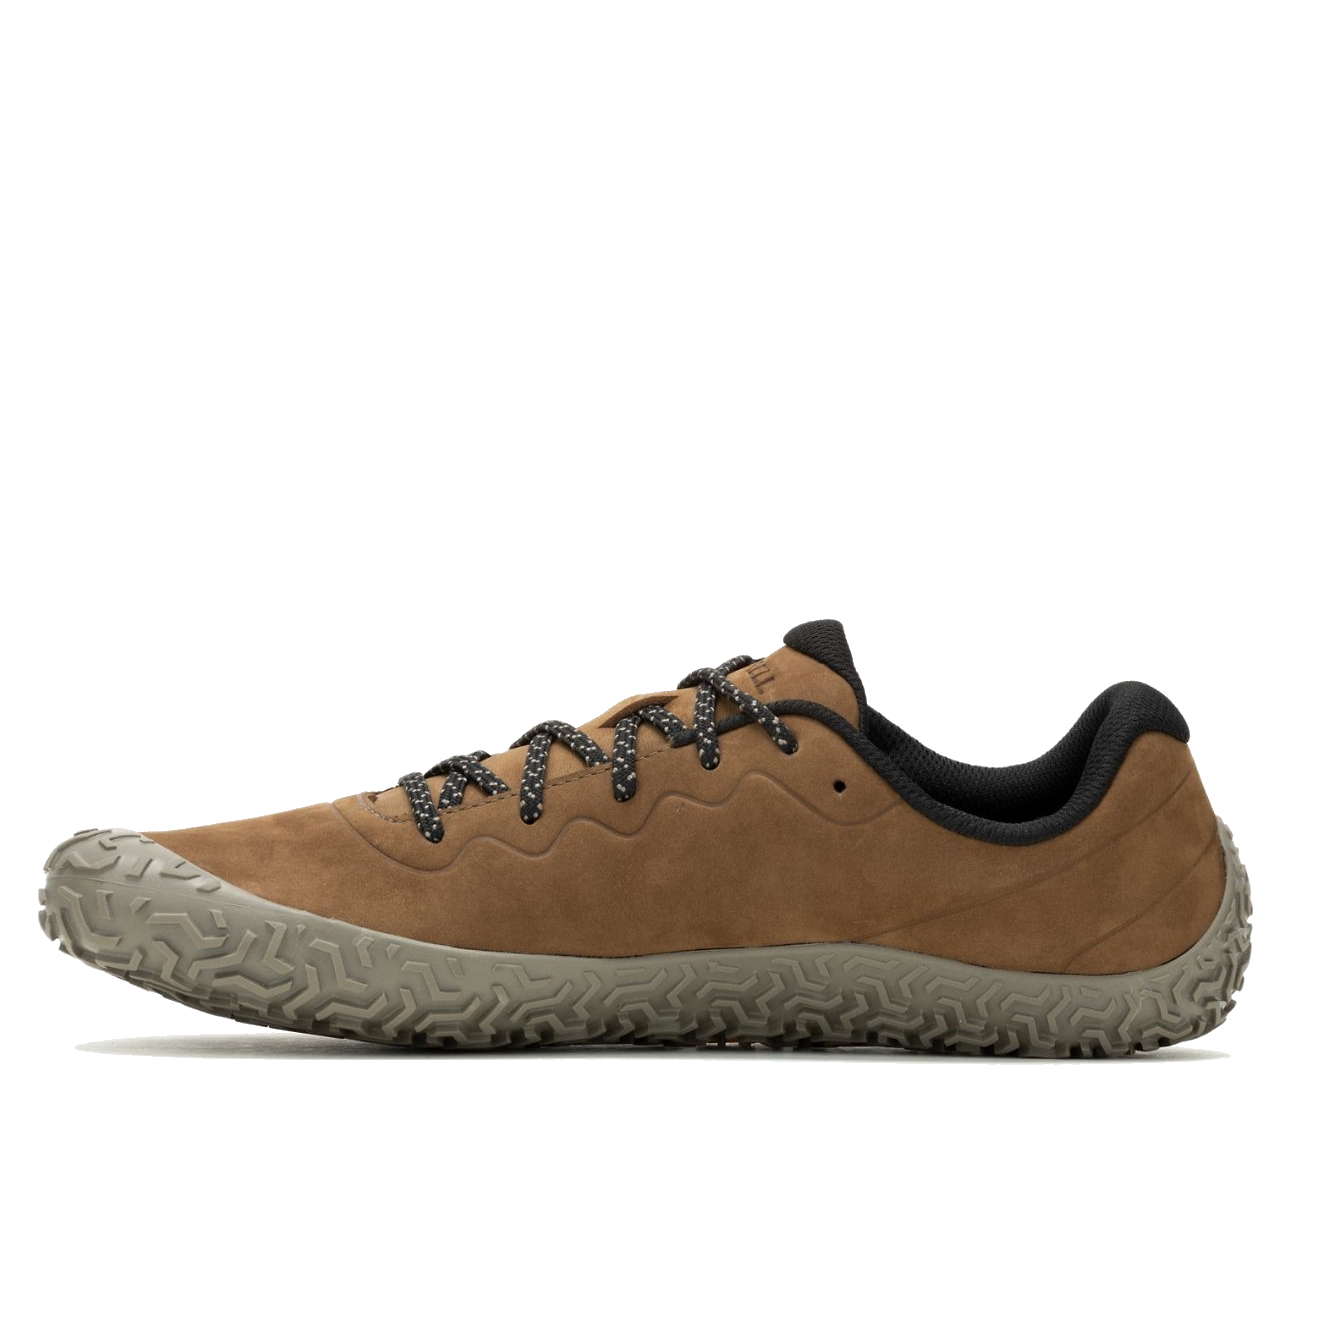 naBOSo – MERRELL VAPOR GLOVE LTR 6 W Tobacco – Merrell – Sneakers – Women –  Experience the Comfort of Barefoot Shoes